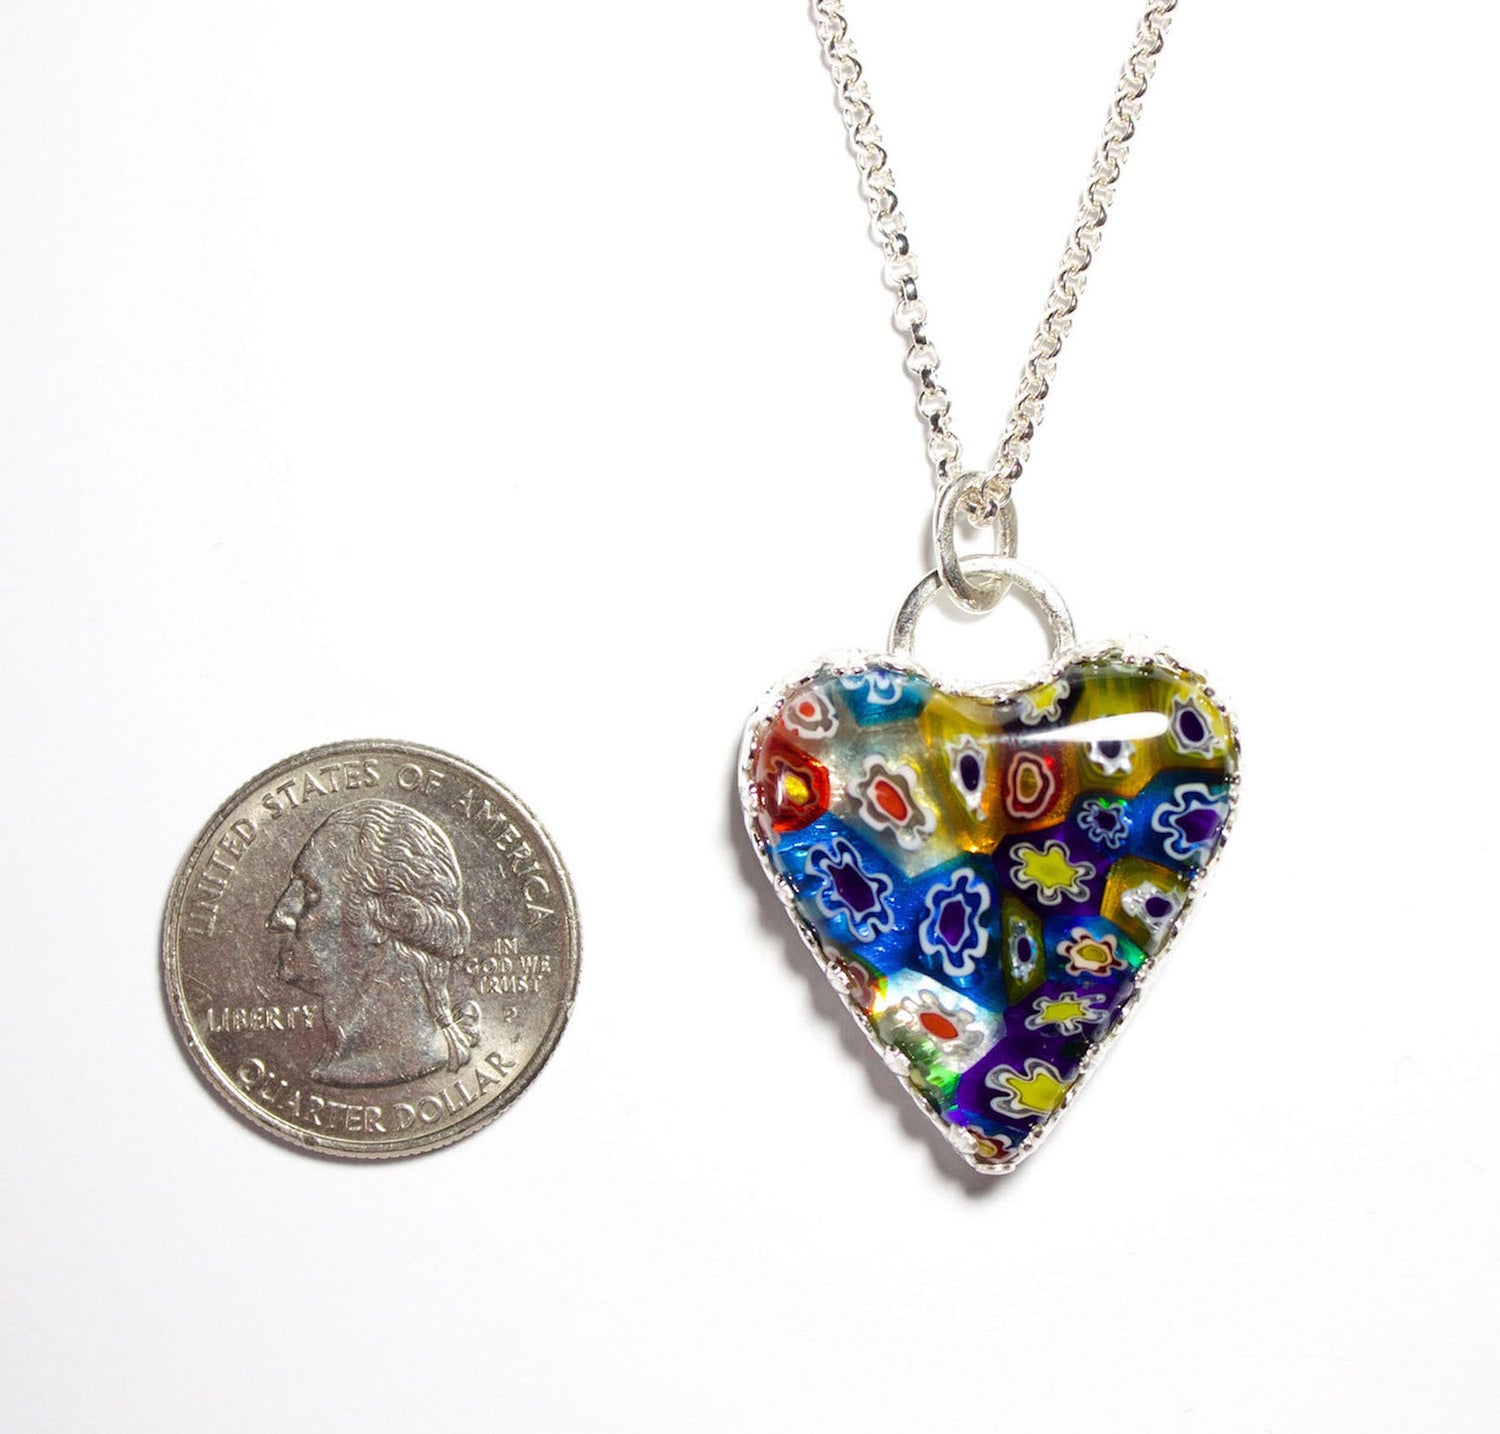 Heart shaped pendant made of millifiore glass. The heart is clear glass filled with glass tubes that are shaped like flowers and go from the front to the back of the heart. Multi color includes red, blue, yellow, and white. Surrounded by a heavy detailed gallery wire.